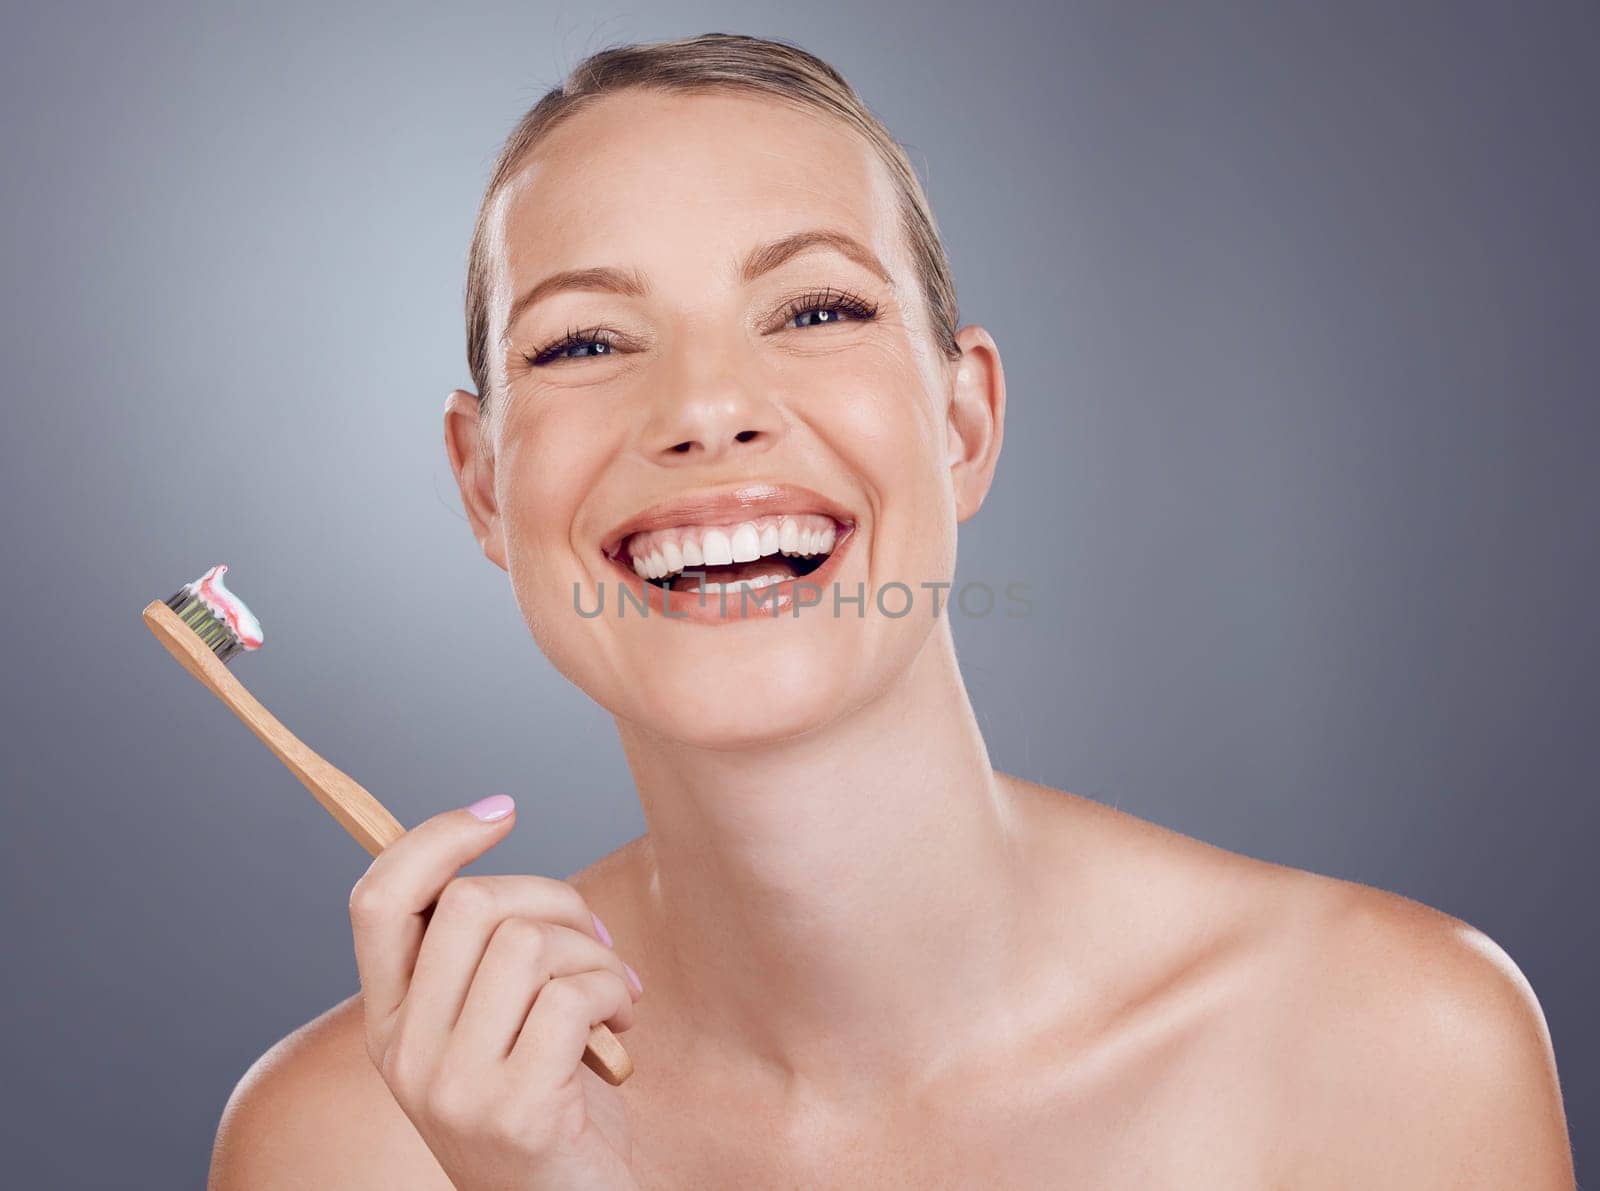 Bamboo toothbrush, happy portrait and woman for dental wellness, healthy cleaning and face cosmetics. Female teeth, eco wooden brush and toothpaste for mouth smile, mature model and studio background.